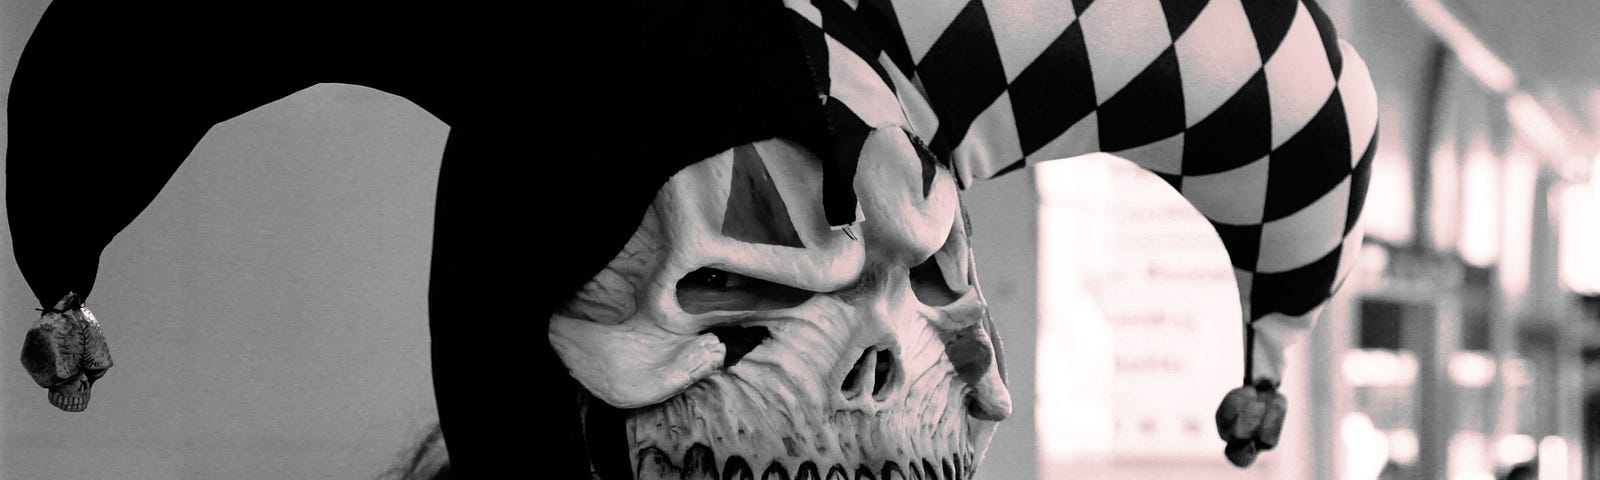 Scary harlequin image in black and white.